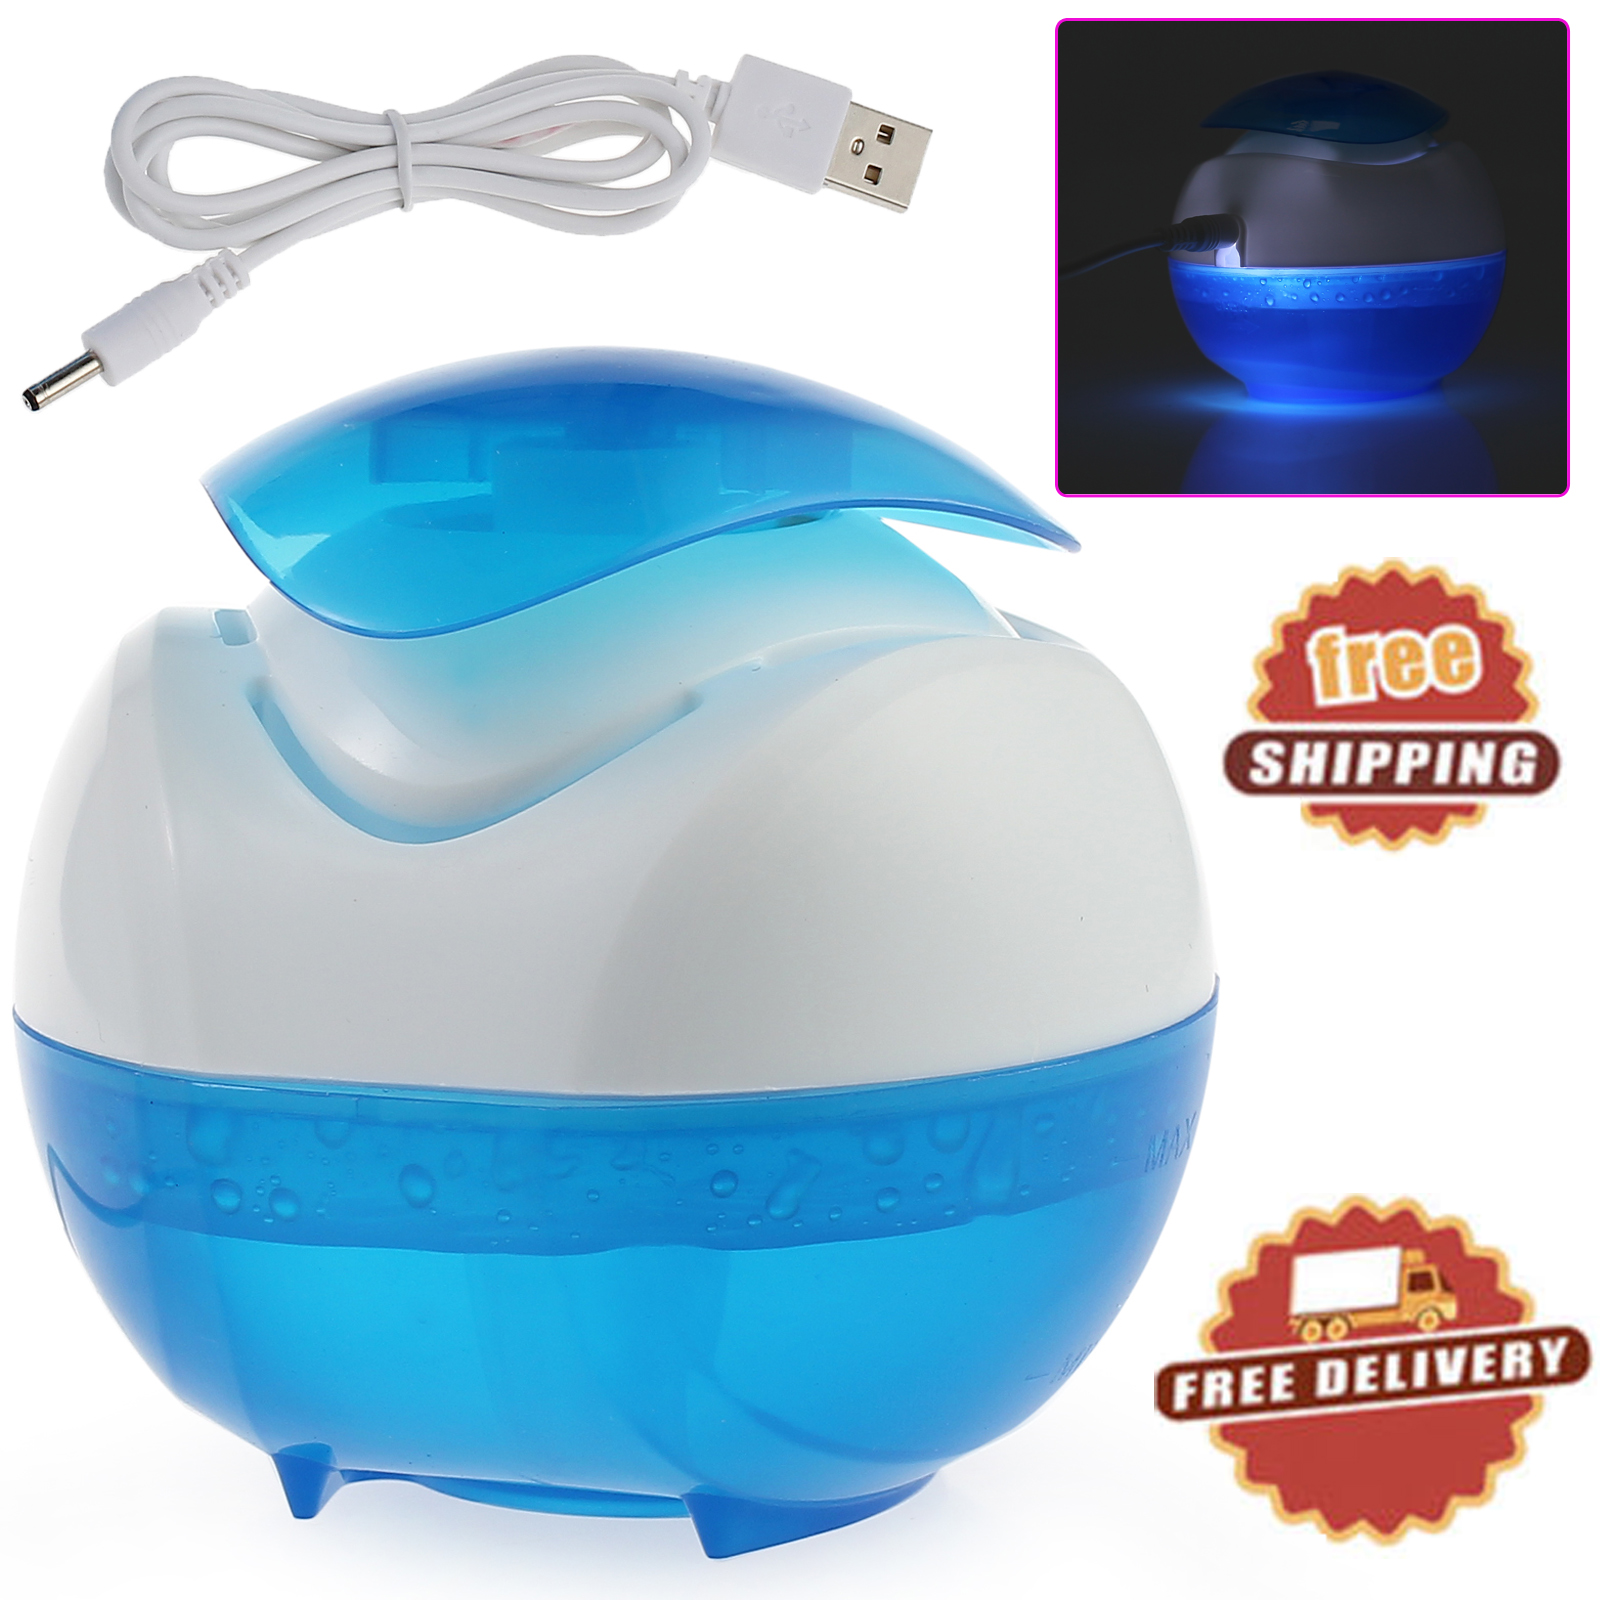 Portable USB LED Air Purifier Humidifier Aroma Essential Diffuser